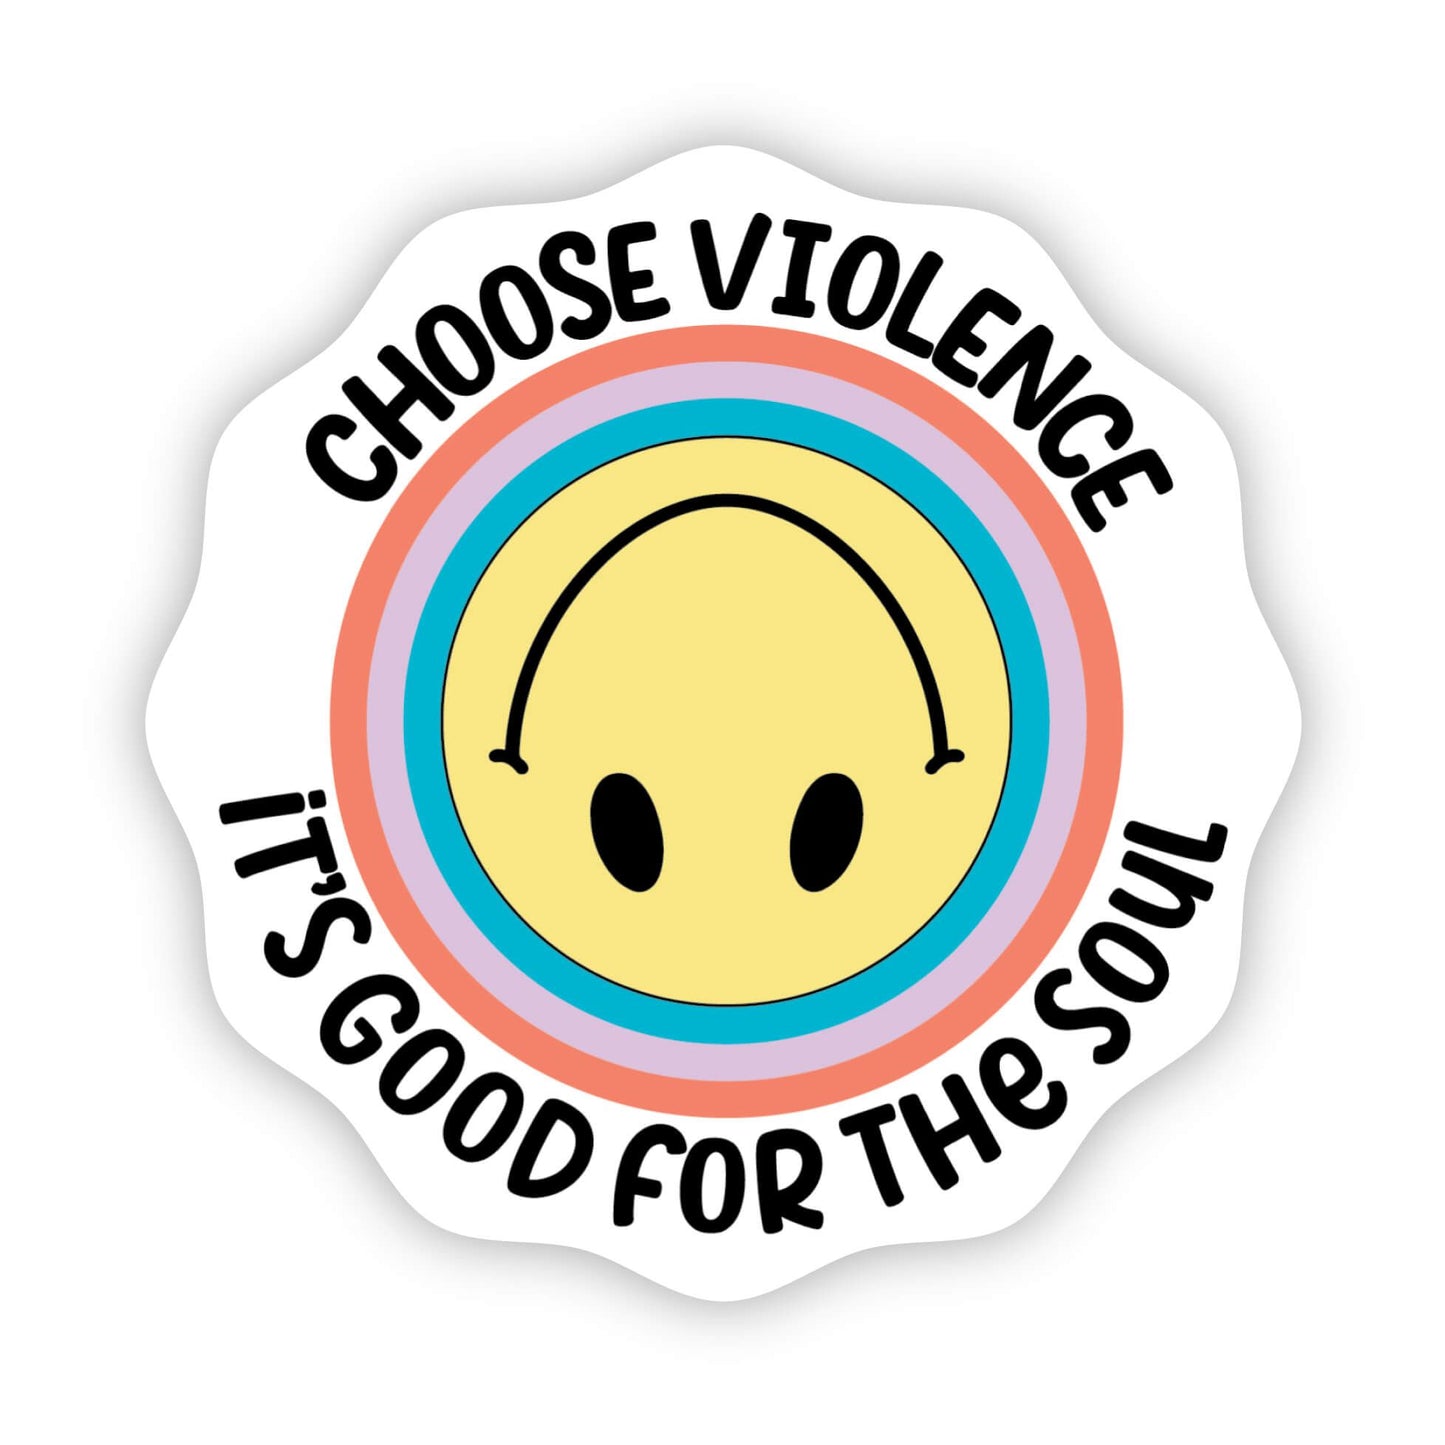 Choose Violence, It's Good for the Soul Sticker